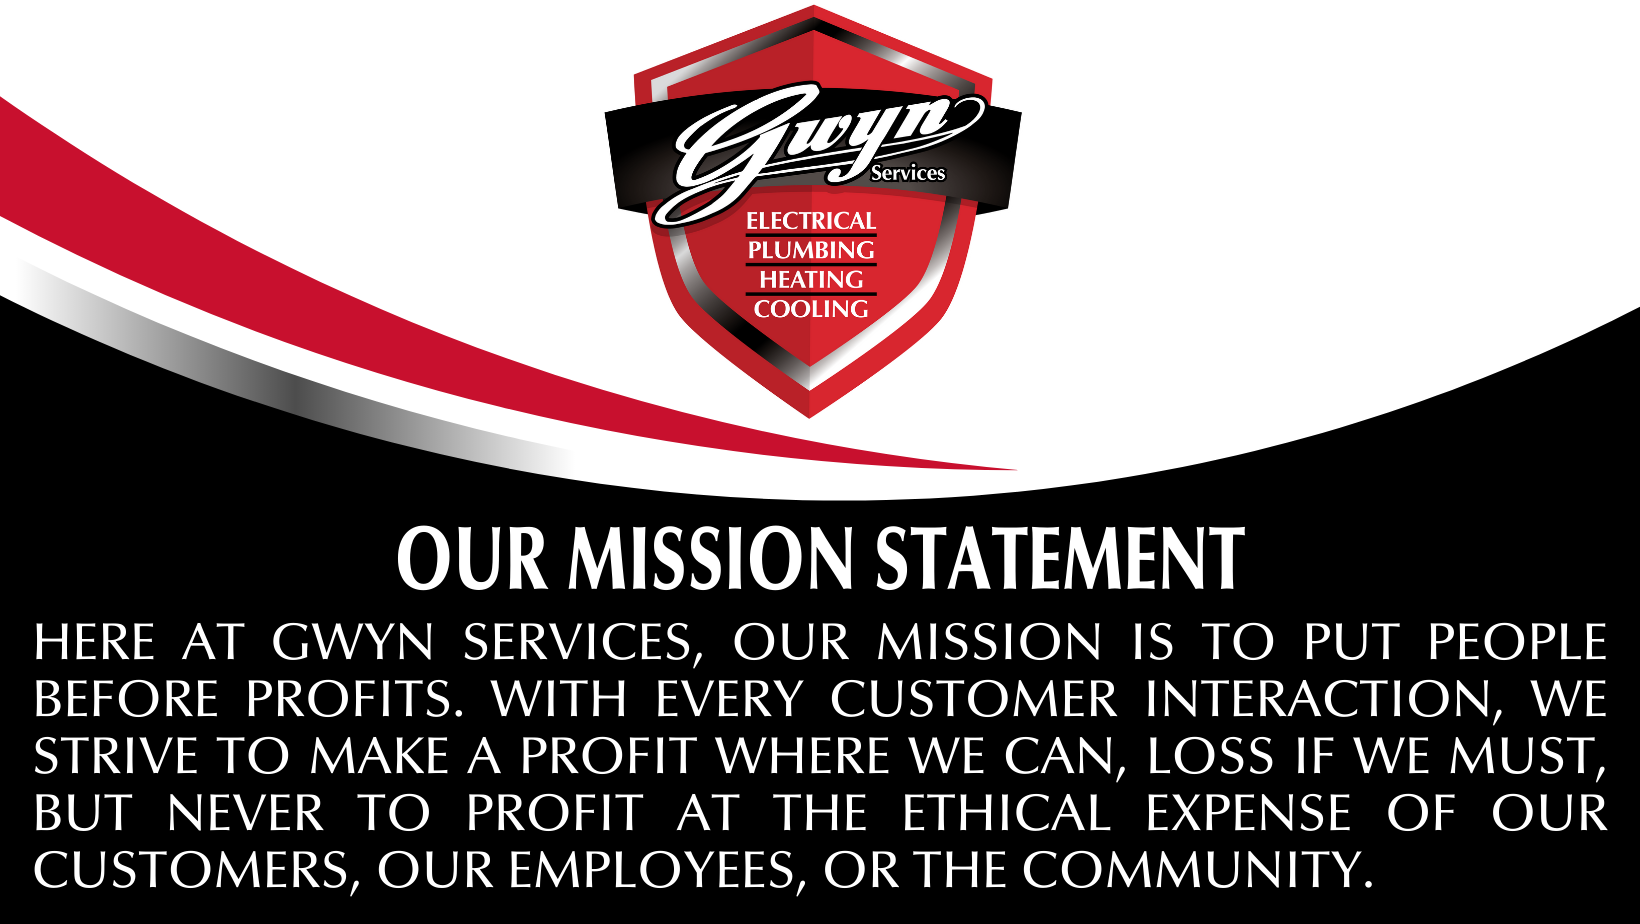 Here at Gwyn Services, our mission is to put people before profits. With every customer interaction, we strive to make a profit where we can, loss if we must, but never to profit at the ethical expense of our customers, our employees, or the community.